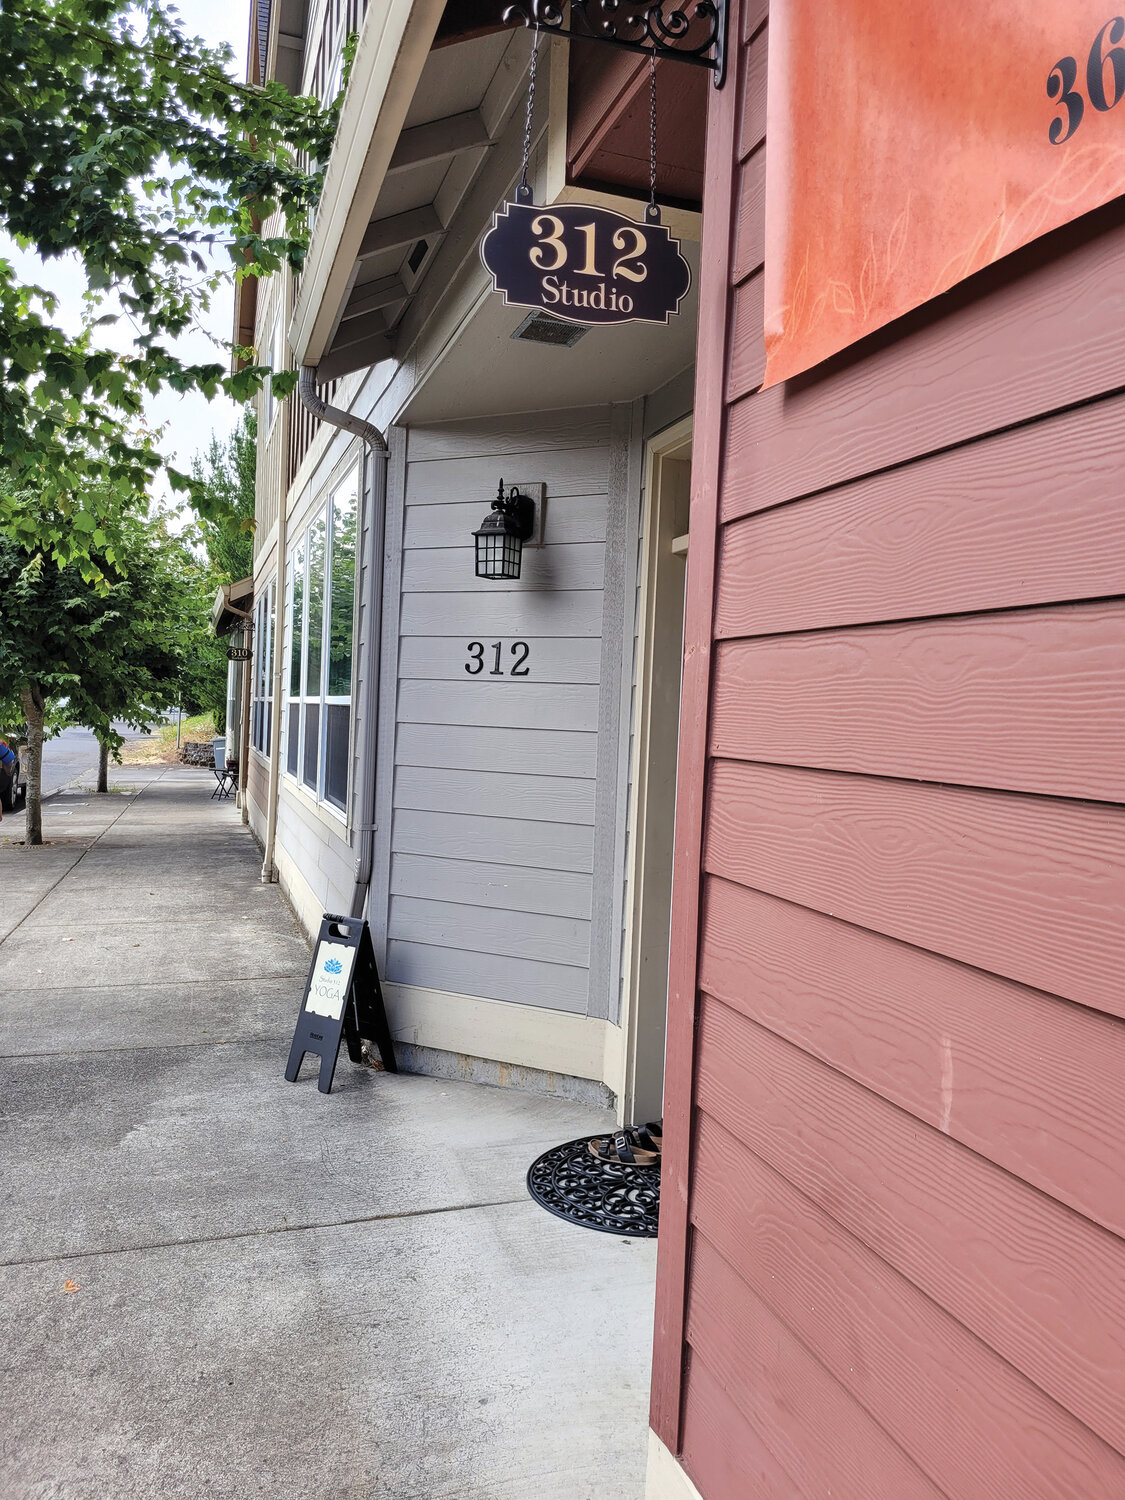 Clark County Wellness and Apothecary and Studio 312 is located at  314 NE First Ave. in Battle Ground.